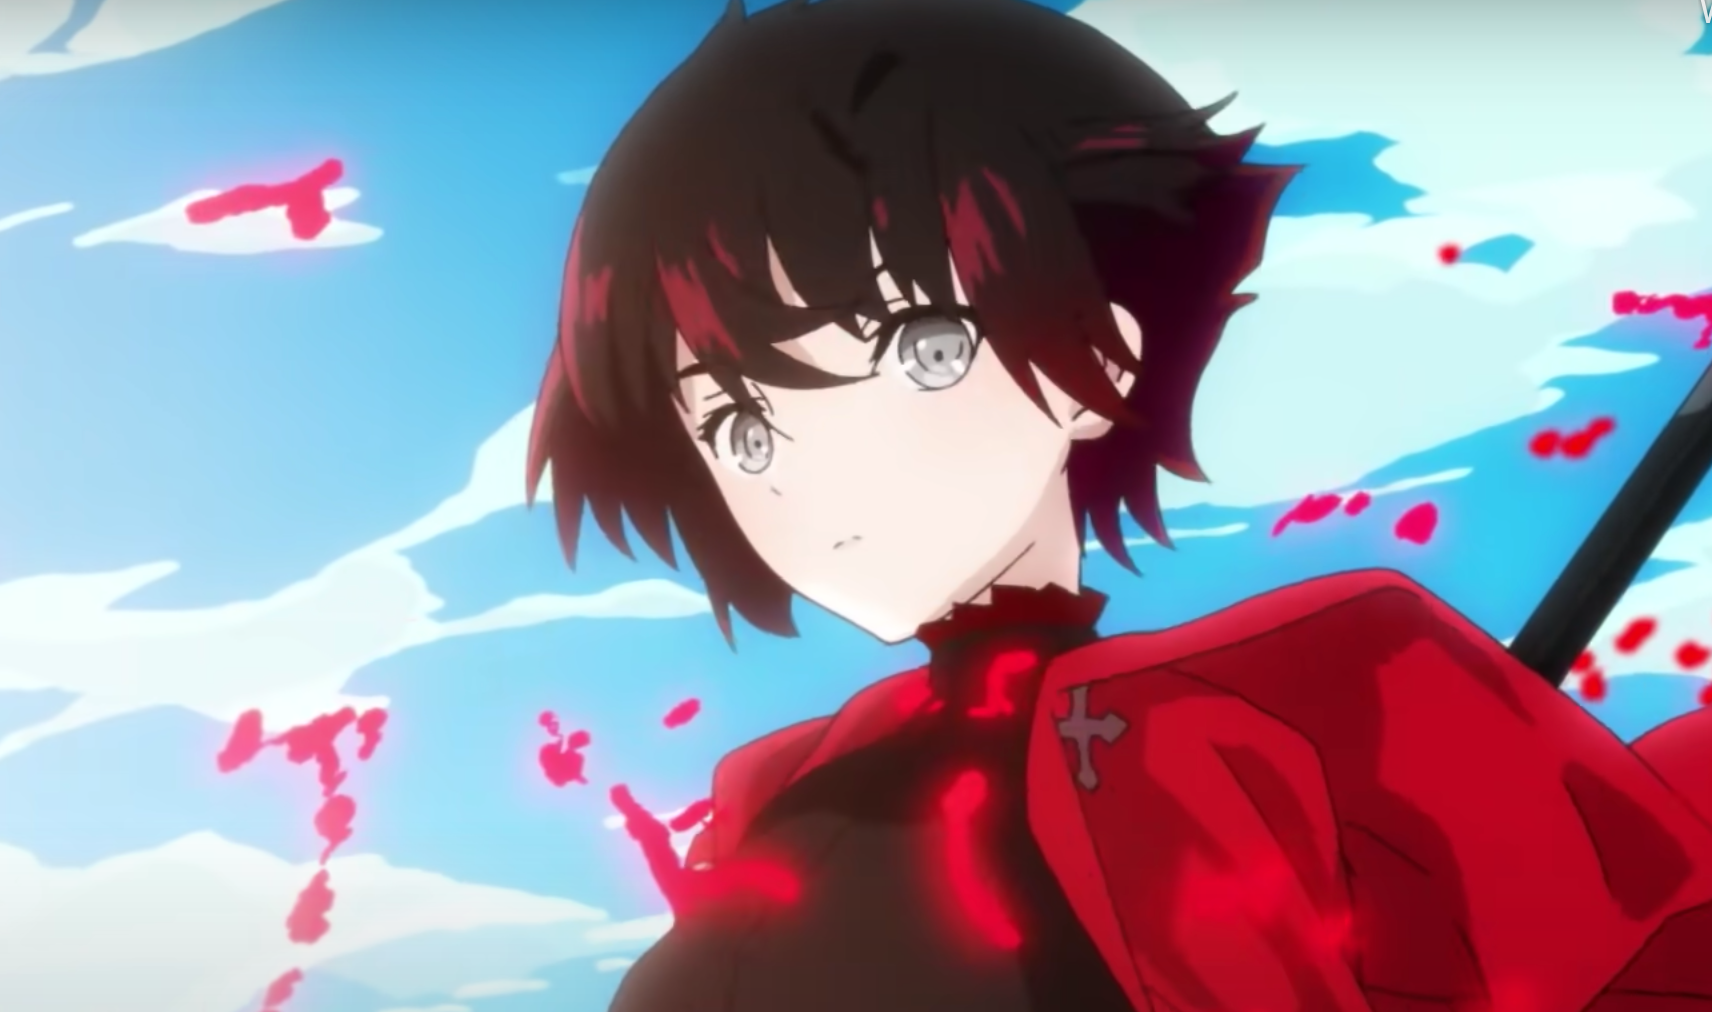 RWBY Arrowfell Video Game Confirms Release Date